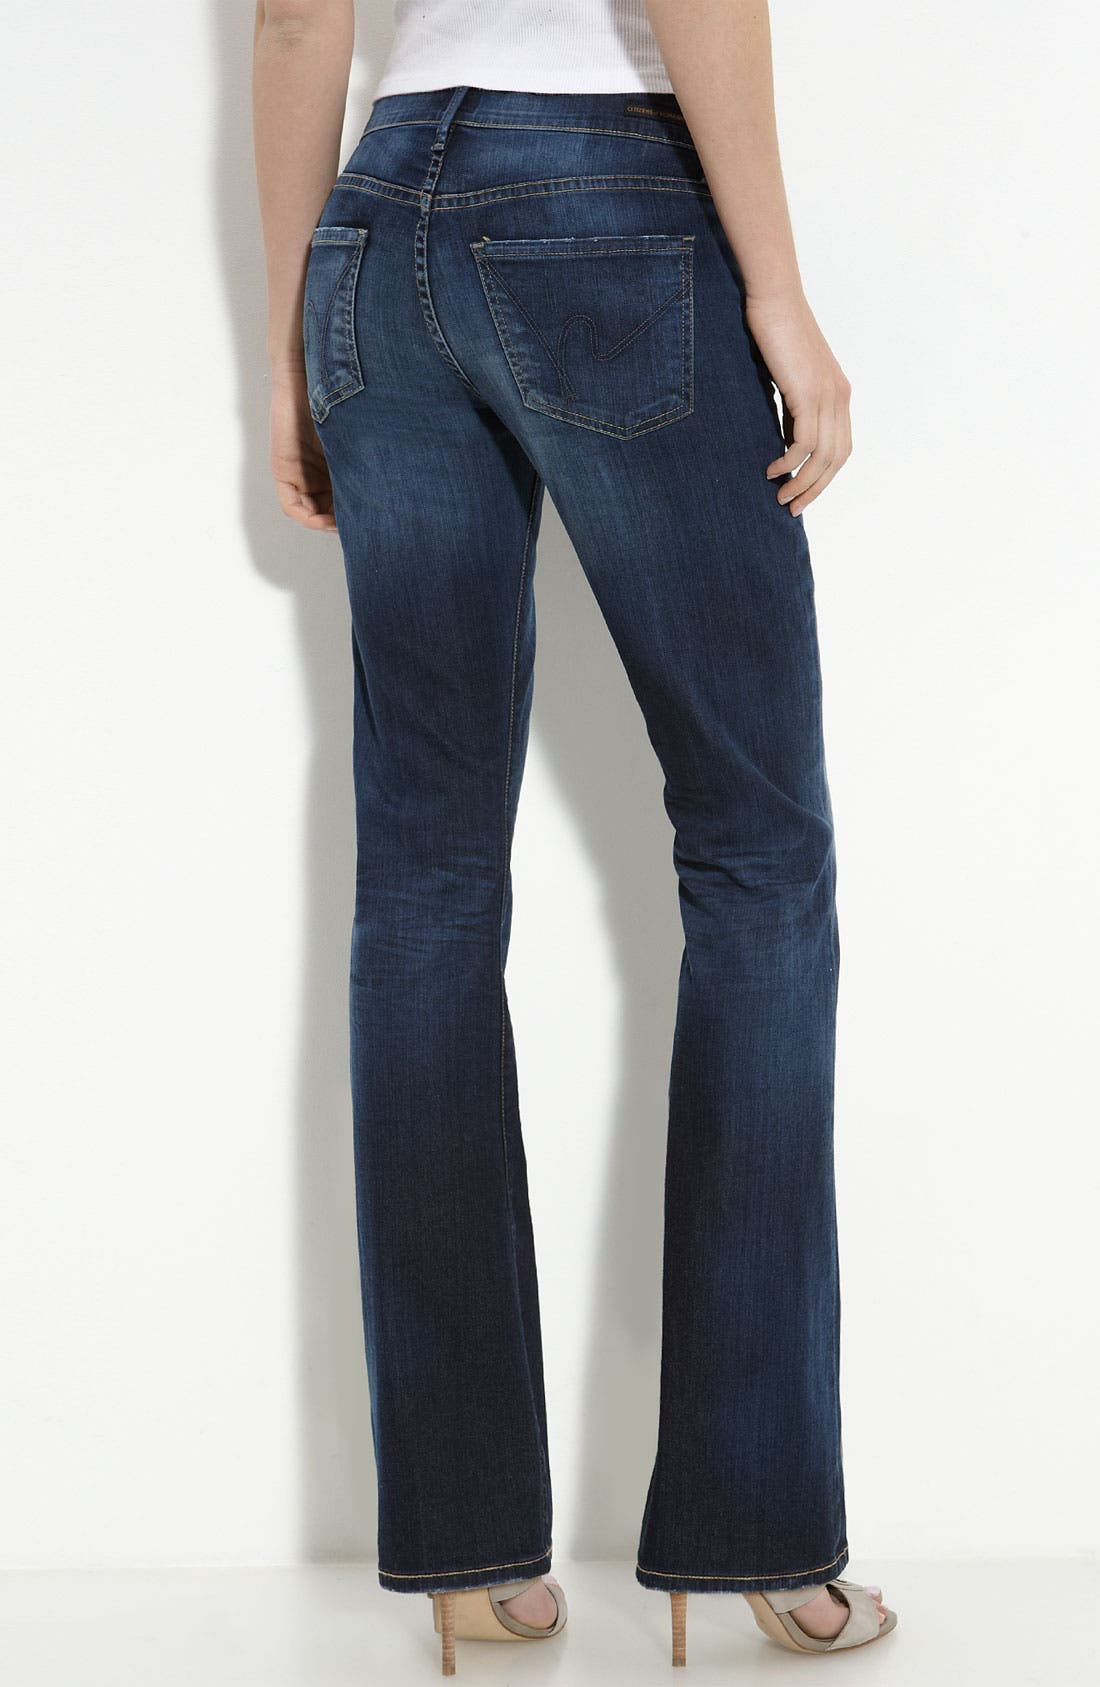 citizens of humanity petite jeans